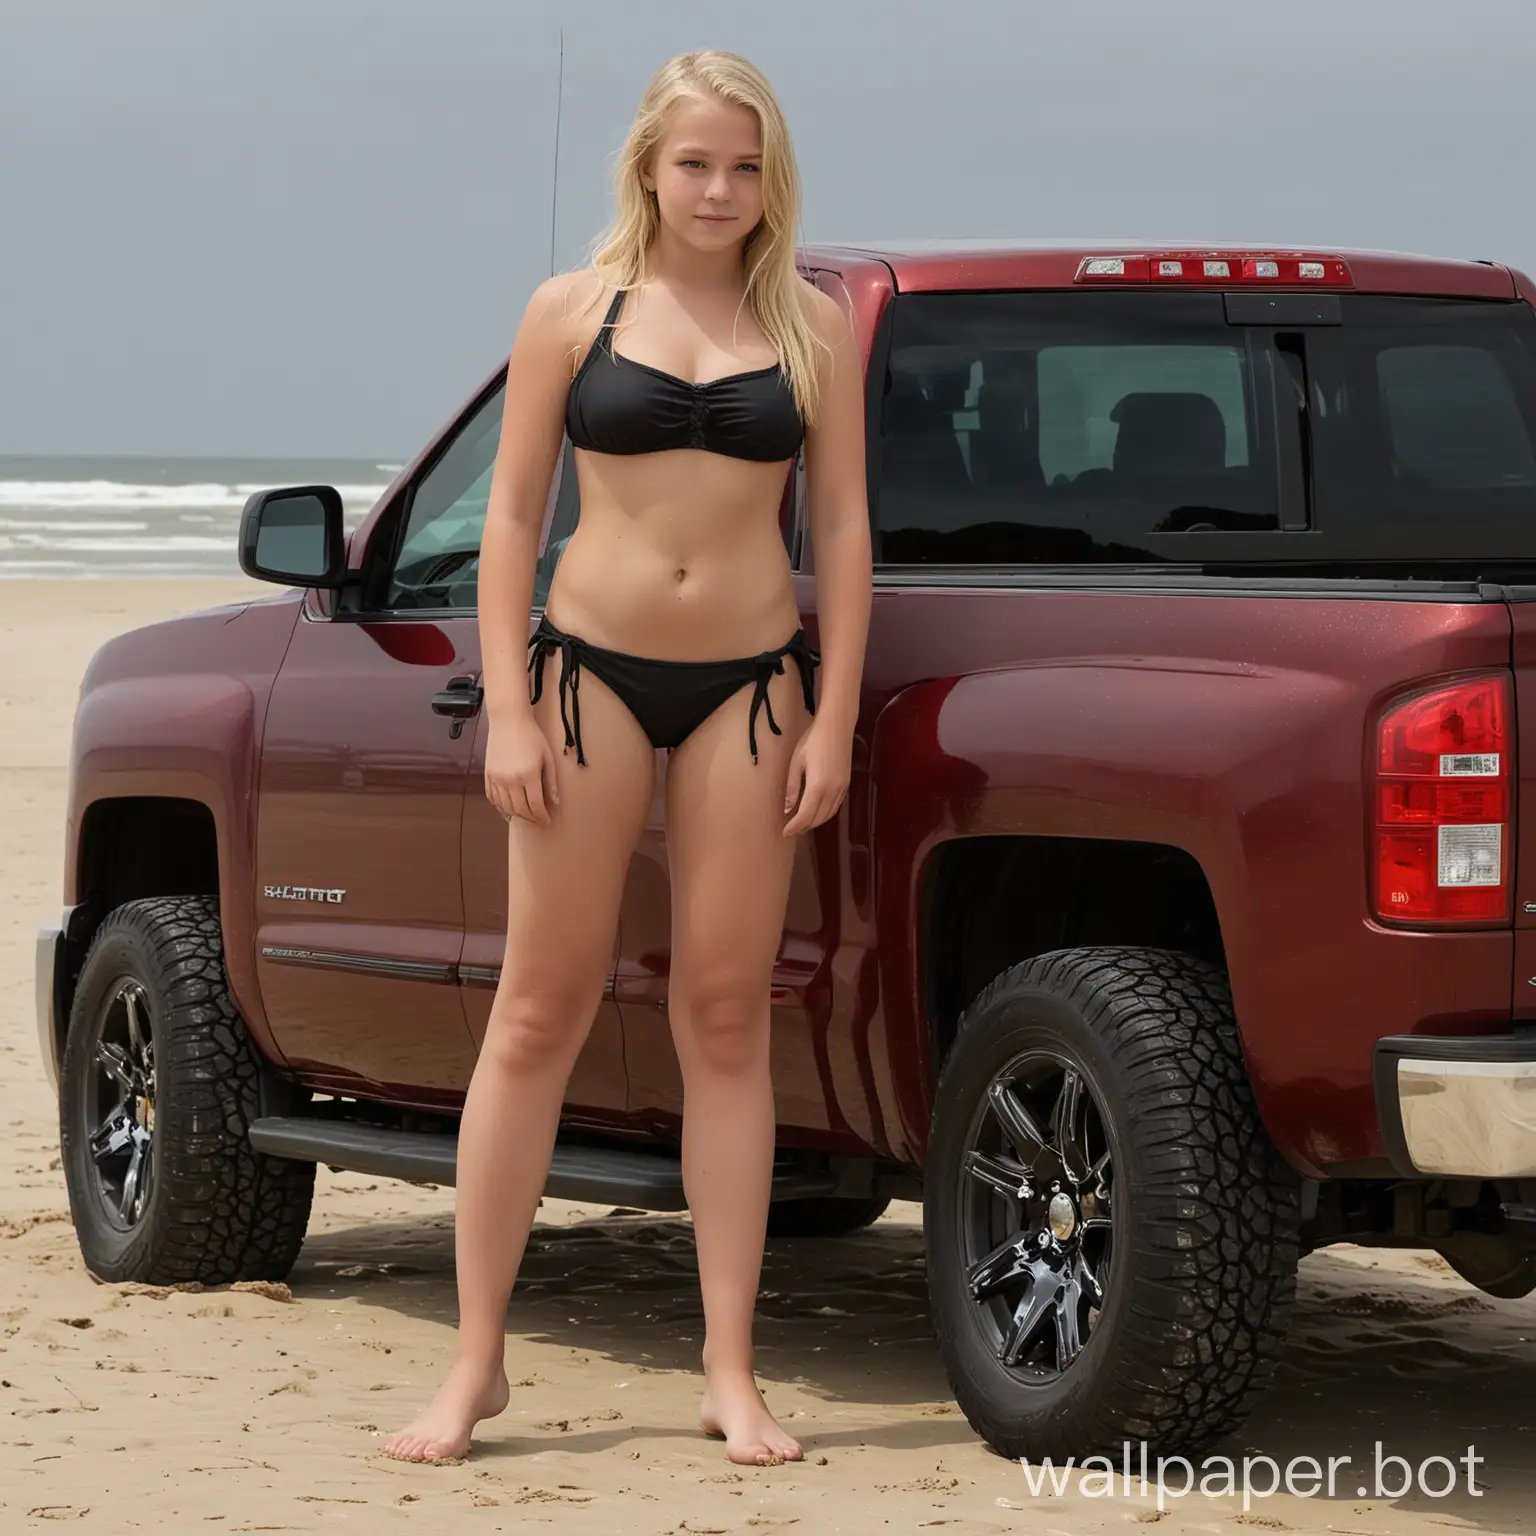 A 12-year-old blonde girl wearing a skimpy black bikini bottom. She is standing in the bed of a 2013 Silverado 2500HD Crew Cab LTZ 4X4 pickup. The pickup has Ruby Red Metallic paint. The pickup is parked on a sandy beach. The wind is blowing the girl's hair.